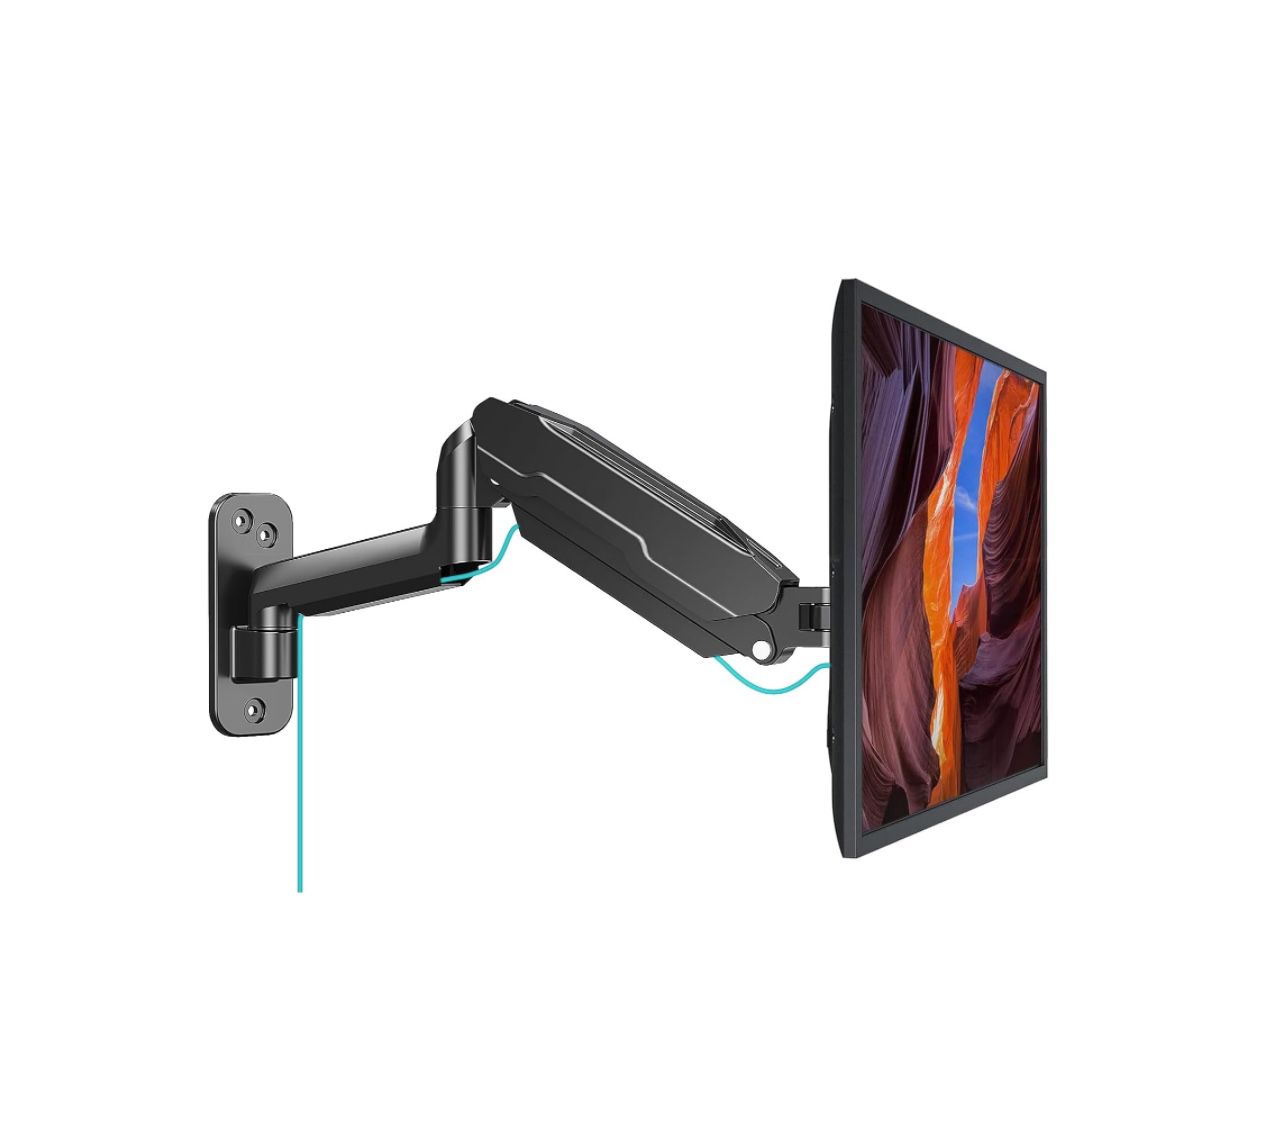 New In It’s Box MOUNT PRO Single Monitor Wall Mount for 13 to 32 Inch Computer Screens, Gas Spring Arm Holds Up to 17.6lbs, Full Motion Adjustable,VES